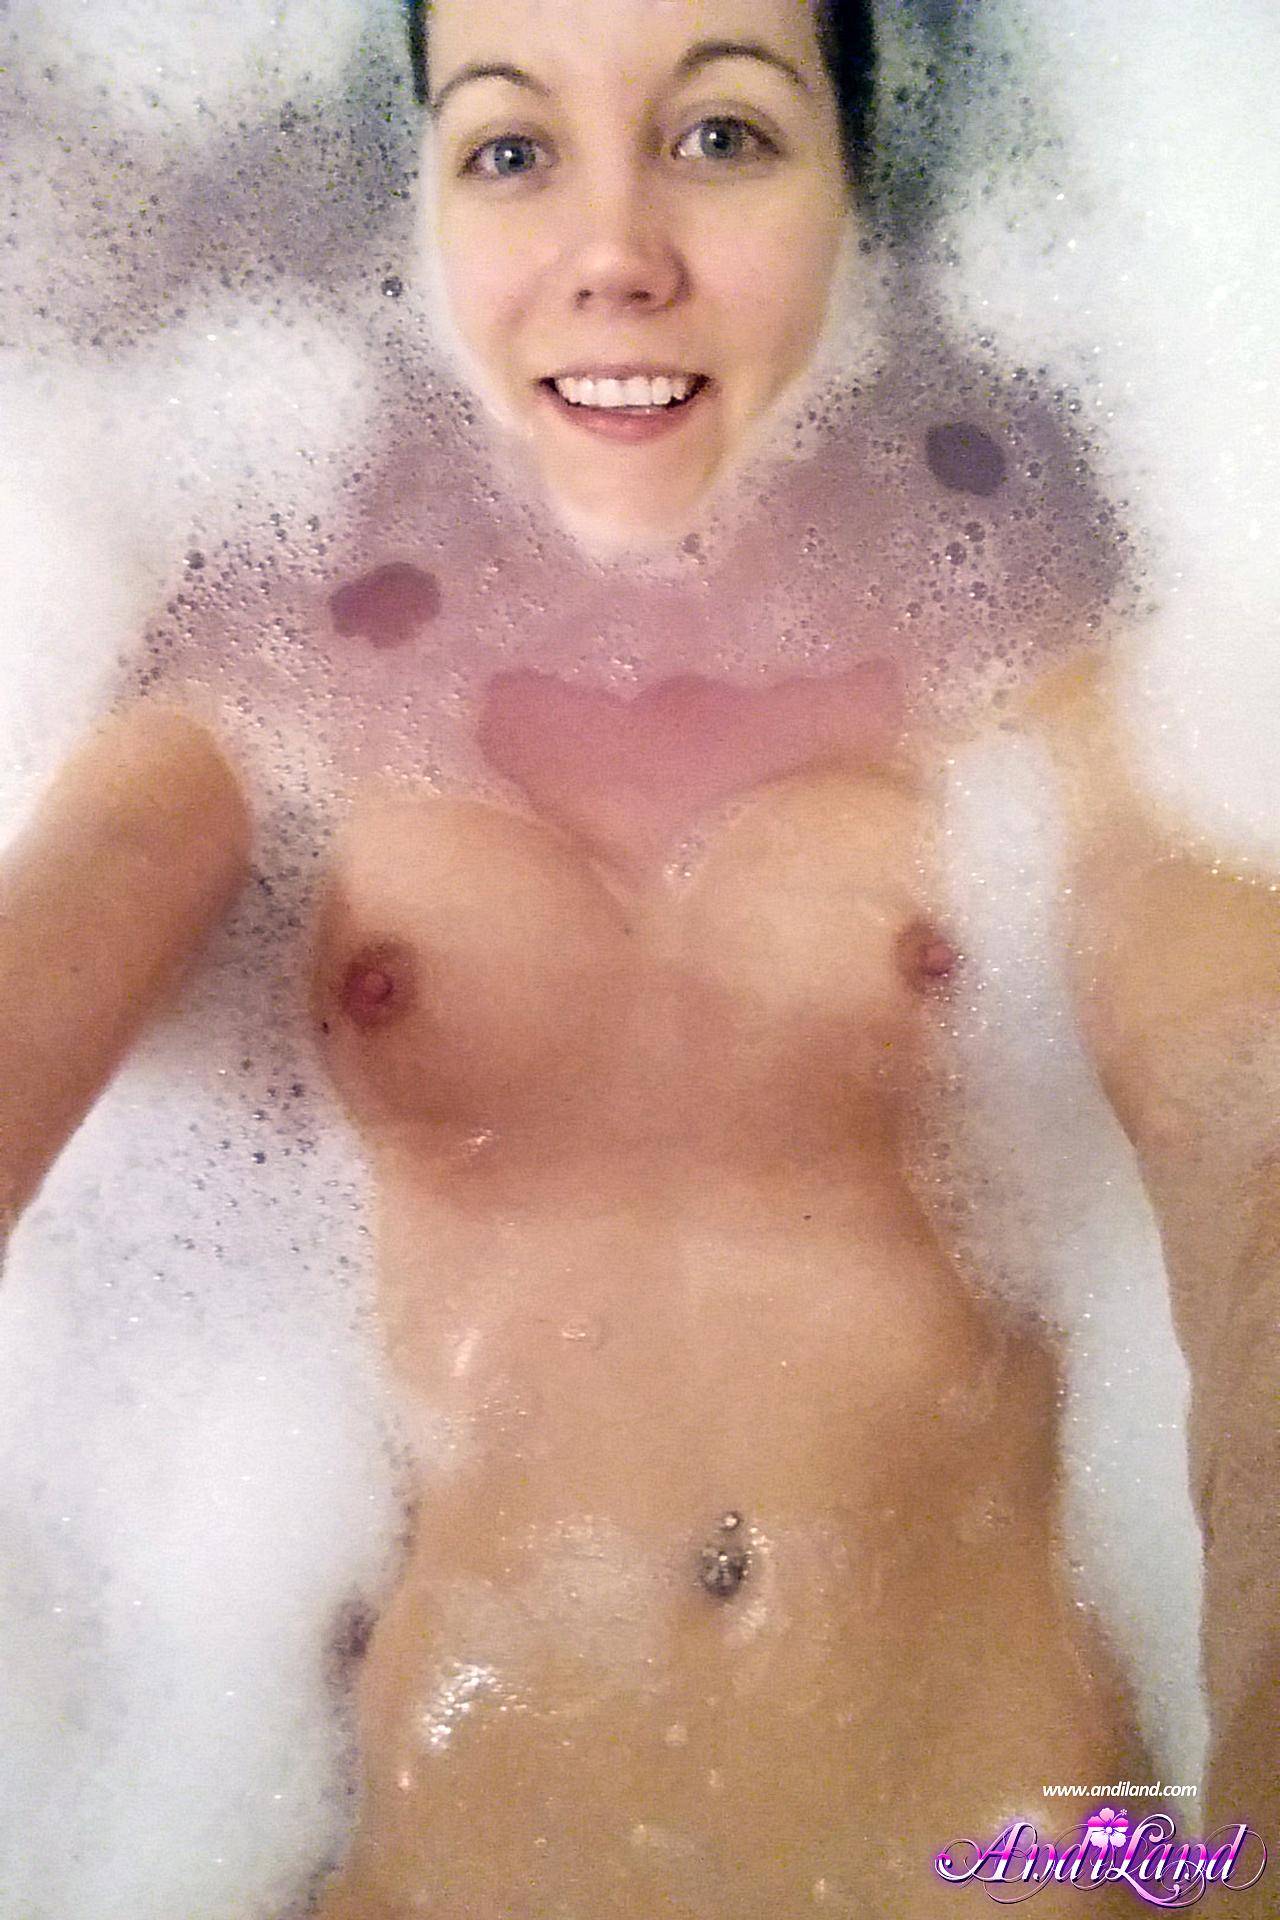 Andi Land takes some selfies for you in the bath #53135334